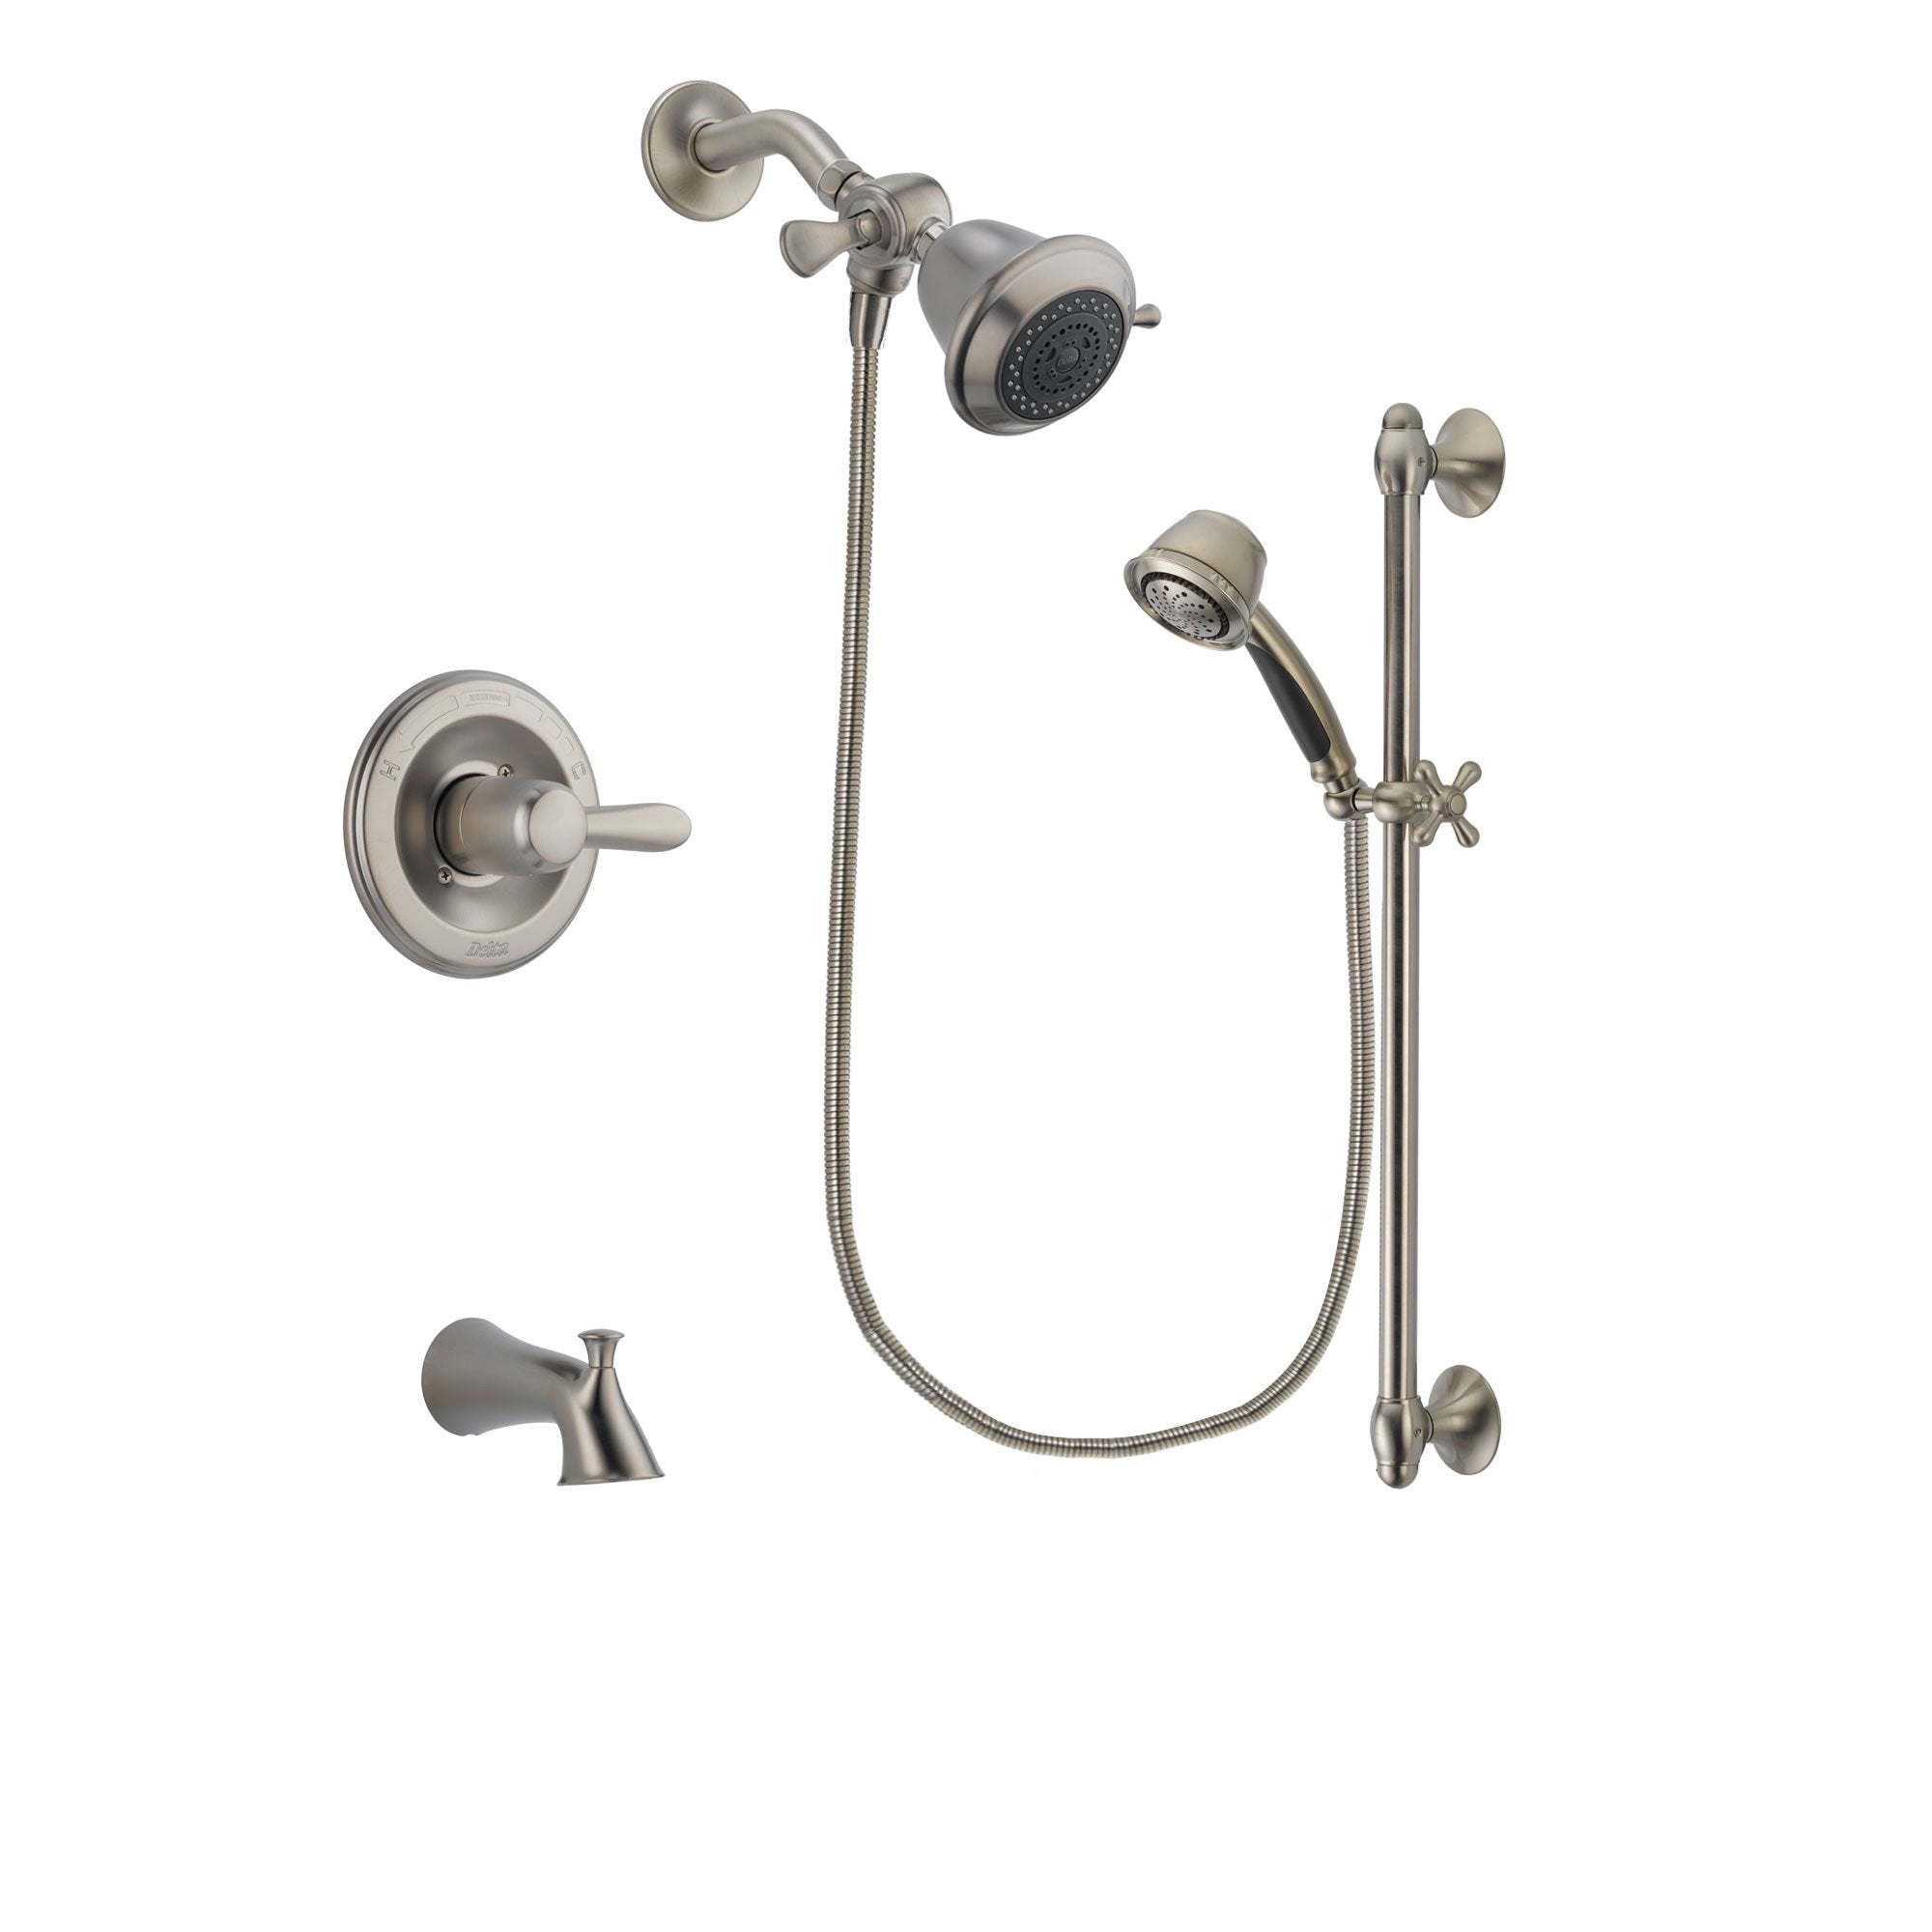 Delta Lahara Stainless Steel Finish Tub and Shower Faucet System Package with Shower Head and 5-Spray Personal Handshower with Slide Bar Includes Rough-in Valve and Tub Spout DSP1251V